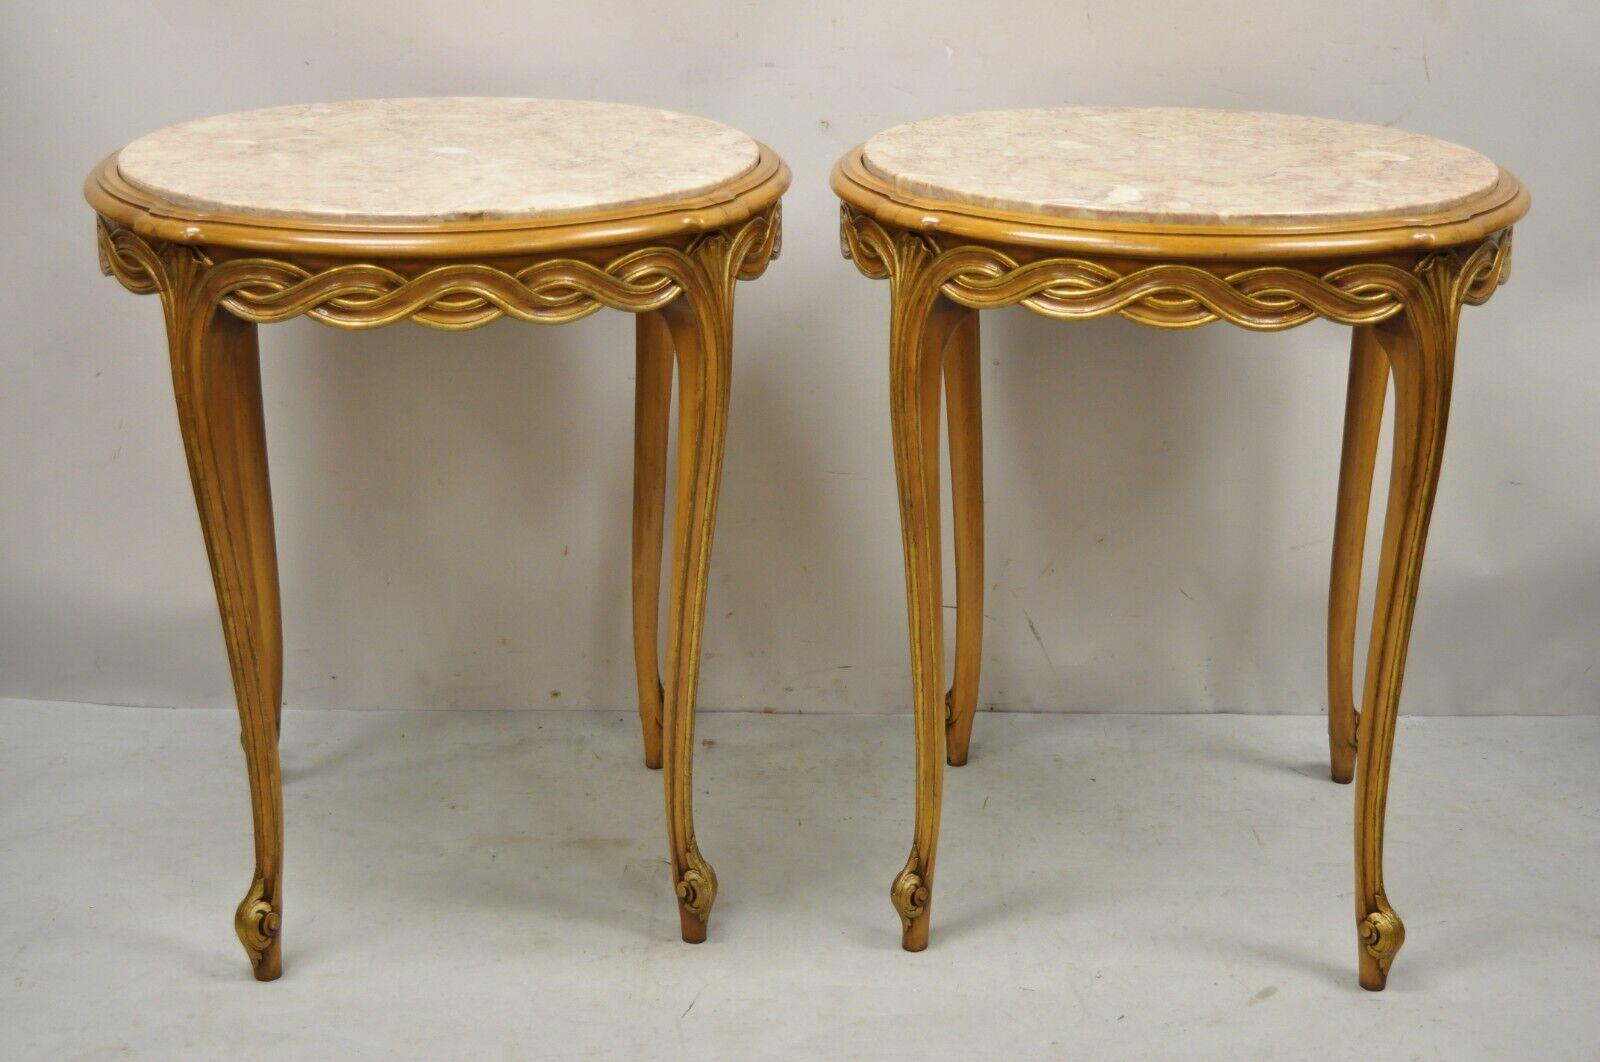 French Provincial Hollywood Regency Round Pink Marble Top Side Tables, a Pair In Good Condition For Sale In Philadelphia, PA